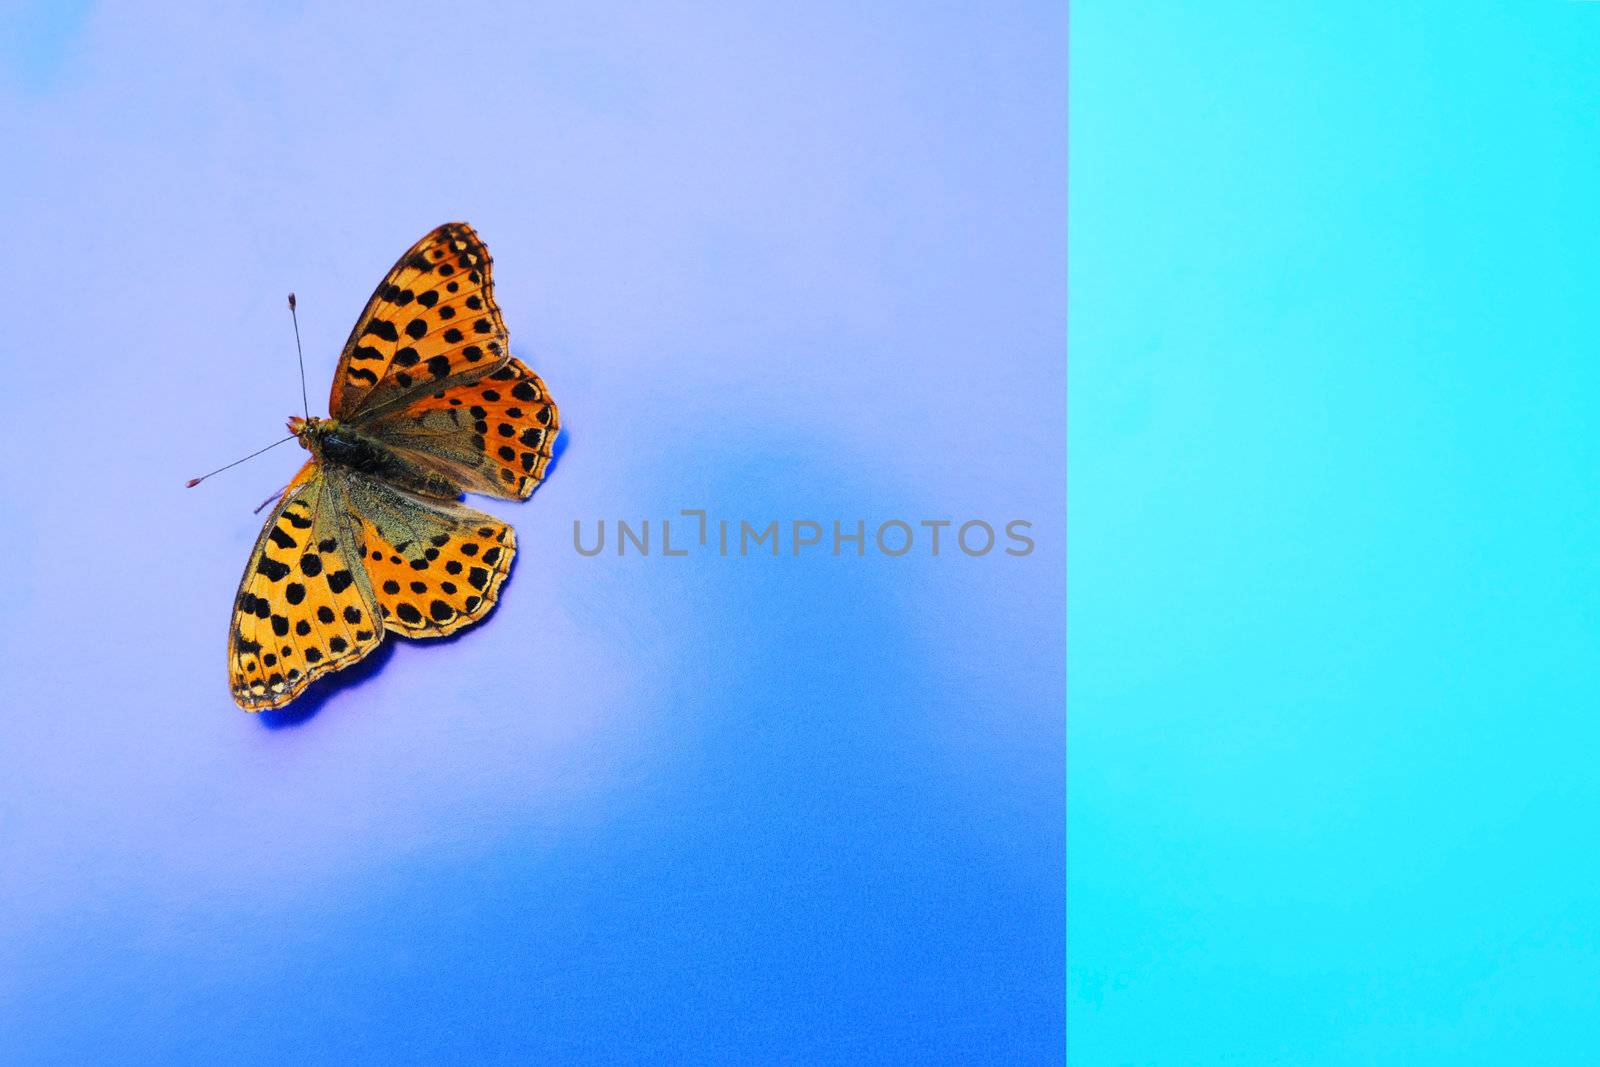 A butterfly on the blue